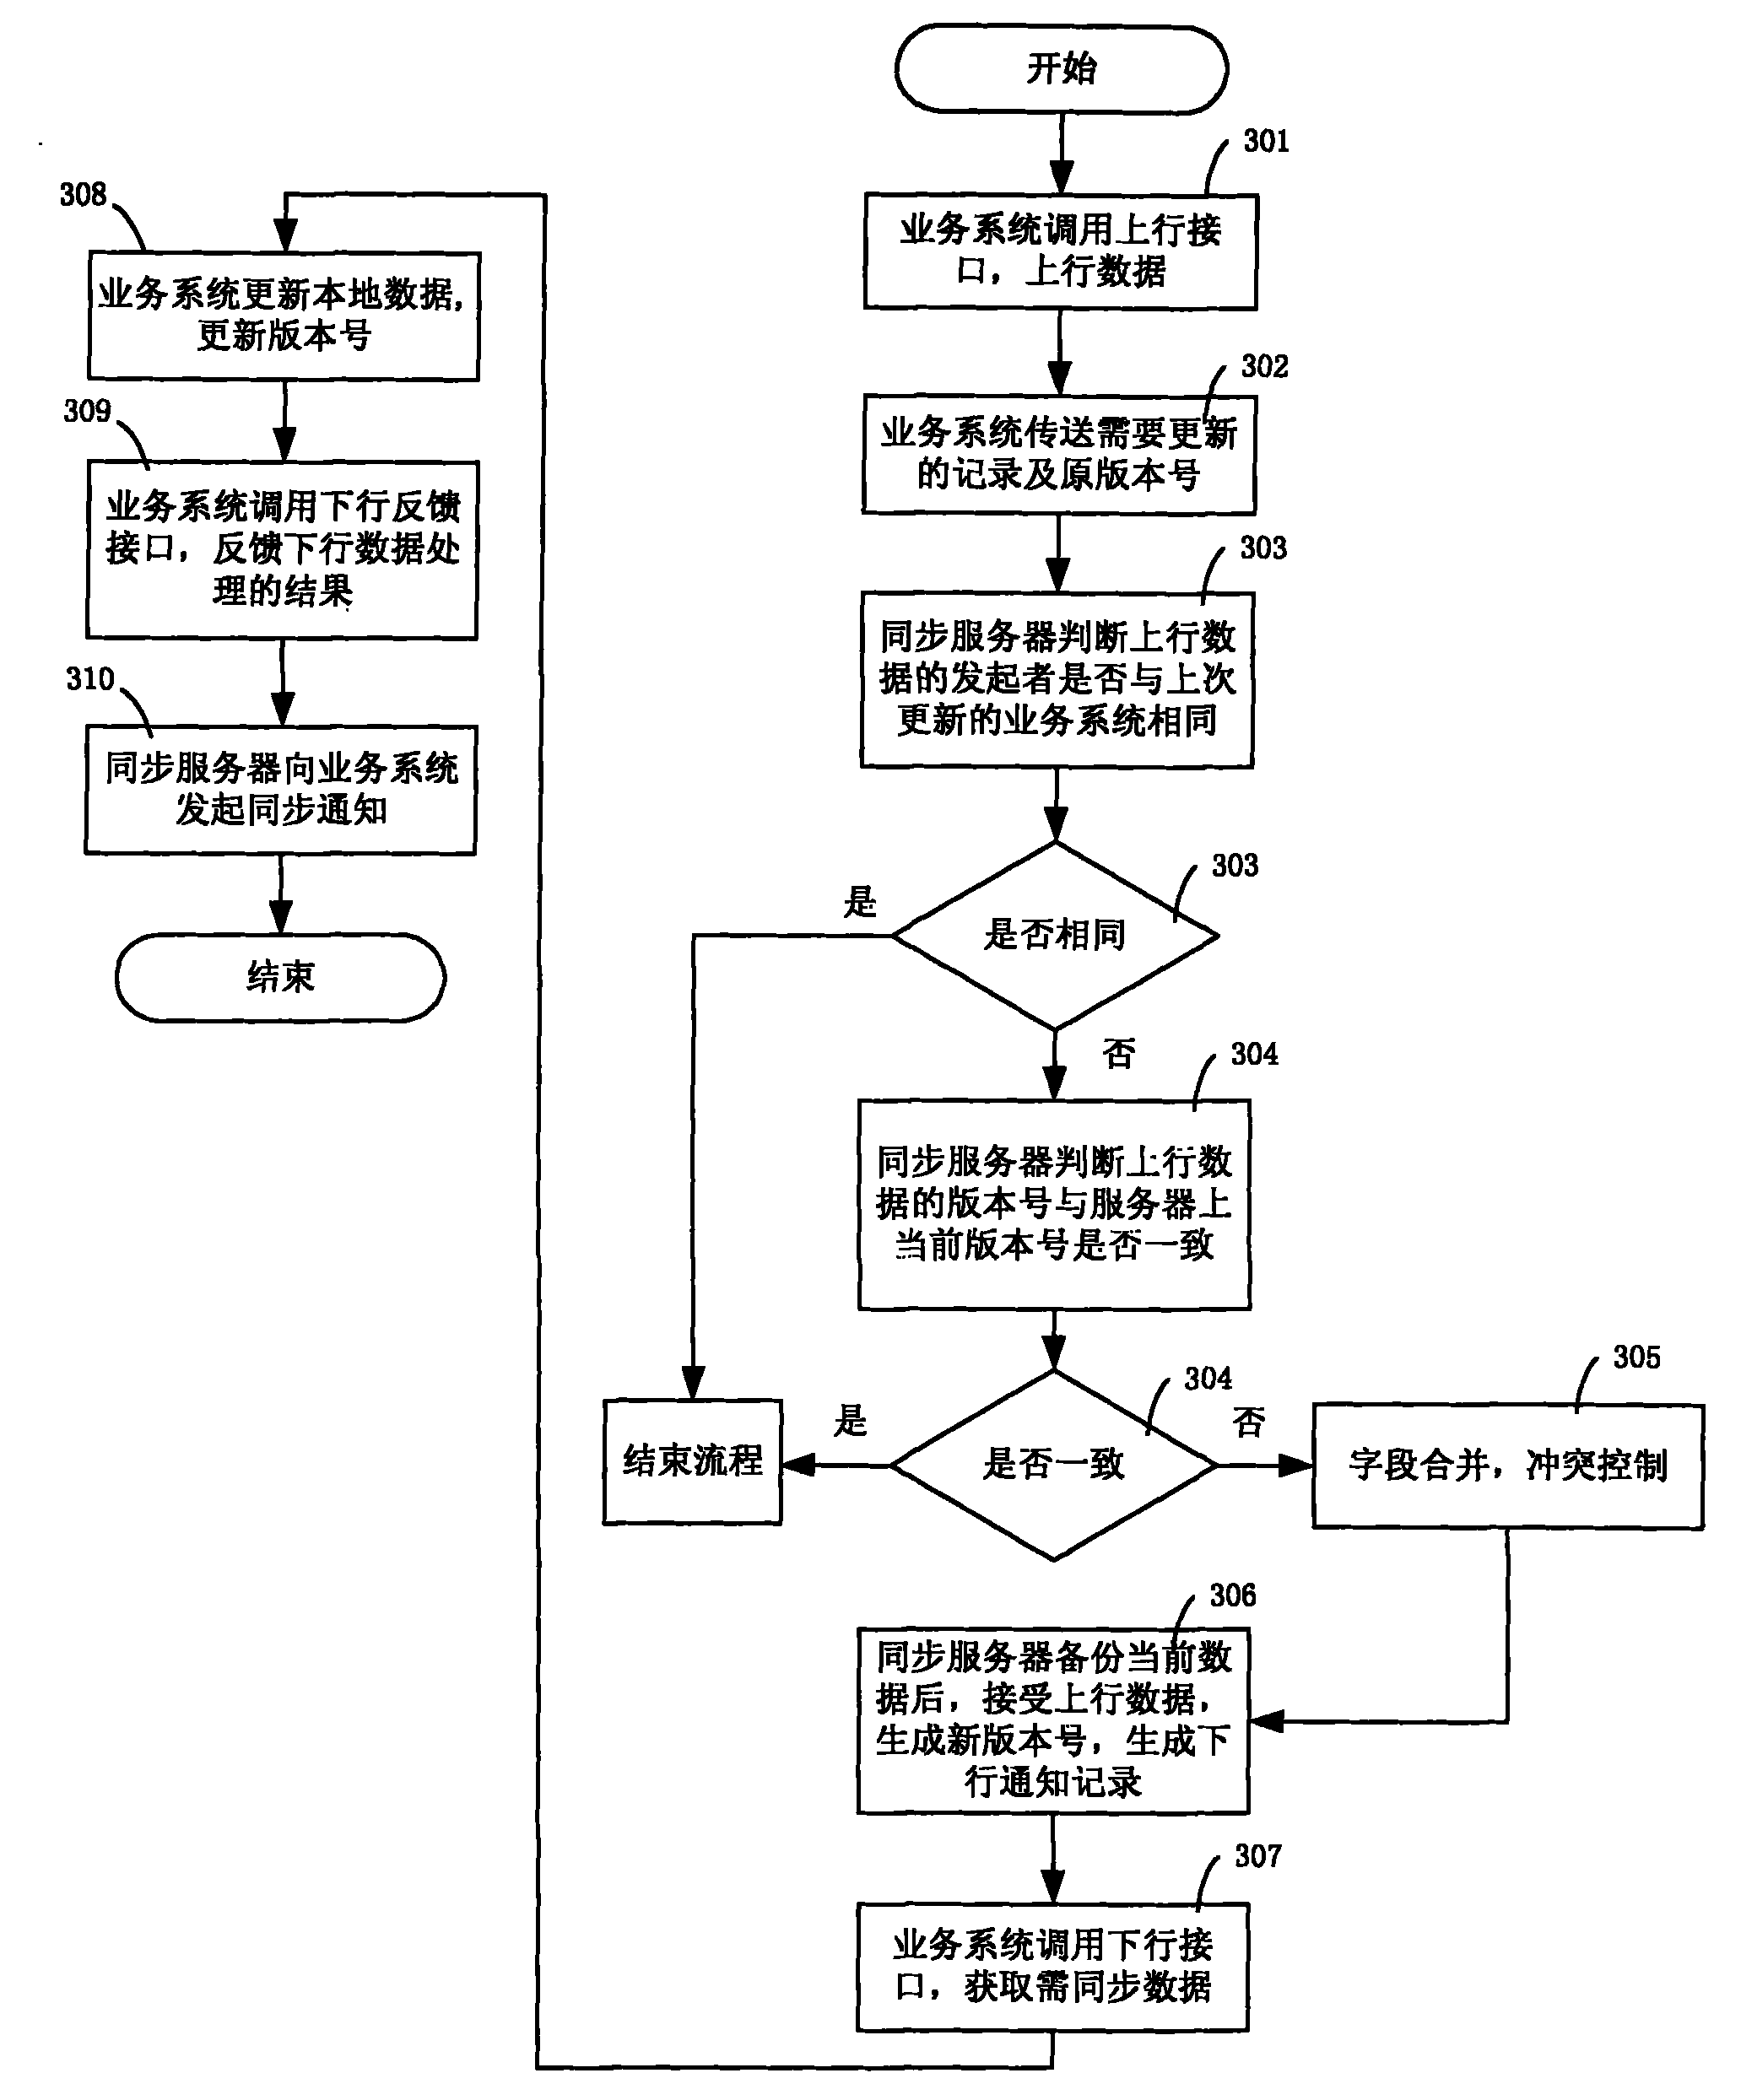 Method and system for realizing multisystem address-book data fusion